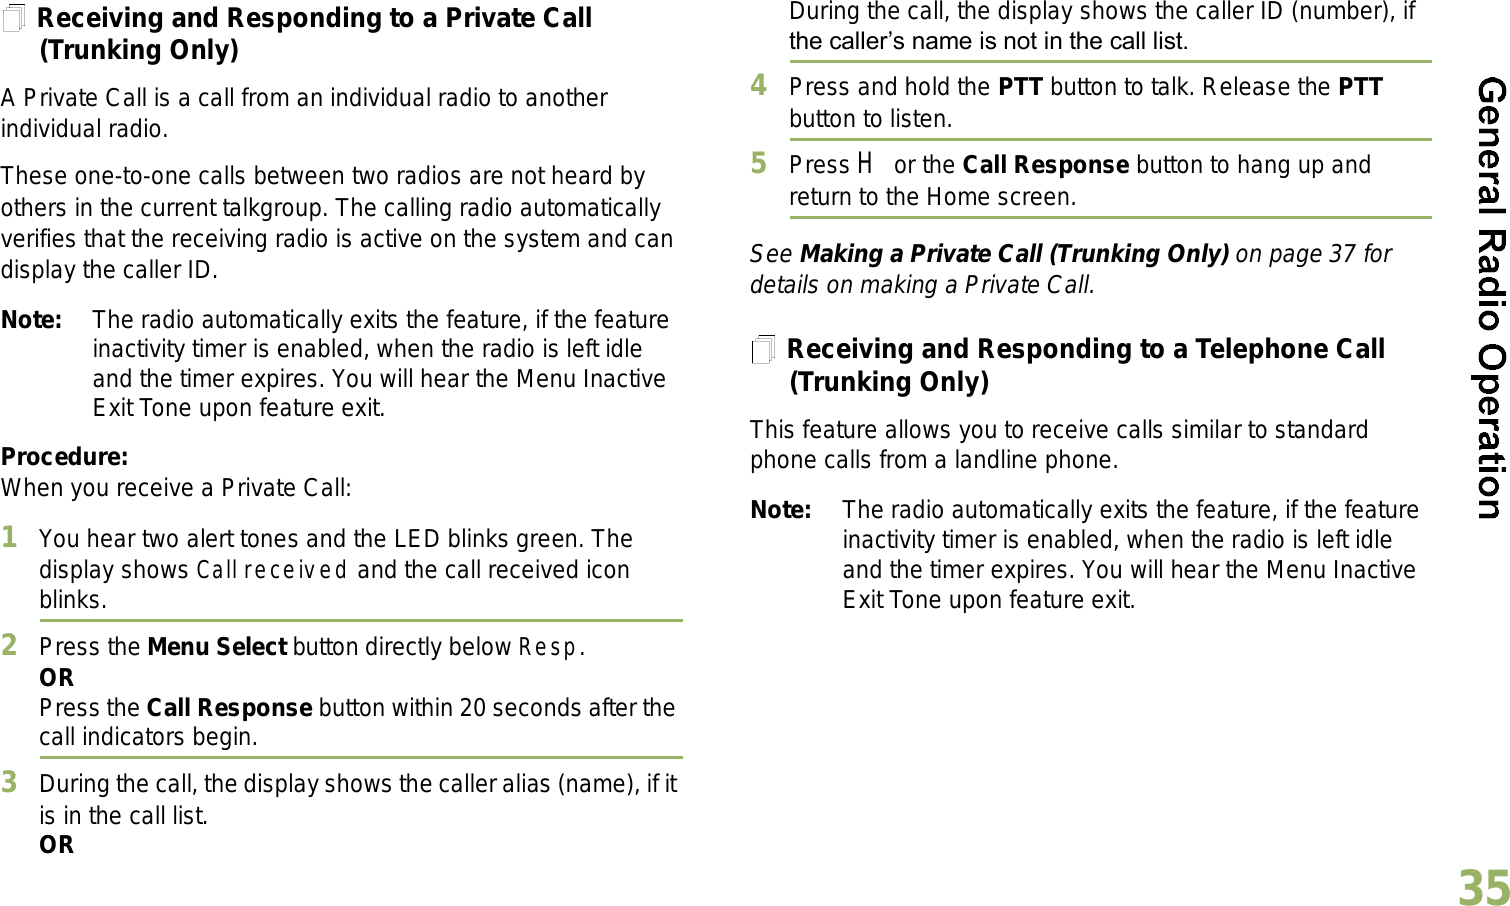 English35Receiving and Responding to a Private Call (Trunking Only)A Private Call is a call from an individual radio to another individual radio.These one-to-one calls between two radios are not heard by others in the current talkgroup. The calling radio automatically verifies that the receiving radio is active on the system and can display the caller ID.Note: The radio automatically exits the feature, if the feature inactivity timer is enabled, when the radio is left idle and the timer expires. You will hear the Menu Inactive Exit Tone upon feature exit.Procedure:When you receive a Private Call:1You hear two alert tones and the LED blinks green. The display shows Call received and the call received icon blinks.2Press the Menu Select button directly below Resp.ORPress the Call Response button within 20 seconds after the call indicators begin.3During the call, the display shows the caller alias (name), if it is in the call list.ORDuring the call, the display shows the caller ID (number), if the callers name is not in the call list.4Press and hold the PTT button to talk. Release the PTT button to listen.5Press H or the Call Response button to hang up and return to the Home screen.See Making a Private Call (Trunking Only) on page 37 for details on making a Private Call.Receiving and Responding to a Telephone Call (Trunking Only)This feature allows you to receive calls similar to standard phone calls from a landline phone.Note: The radio automatically exits the feature, if the feature inactivity timer is enabled, when the radio is left idle and the timer expires. You will hear the Menu Inactive Exit Tone upon feature exit.